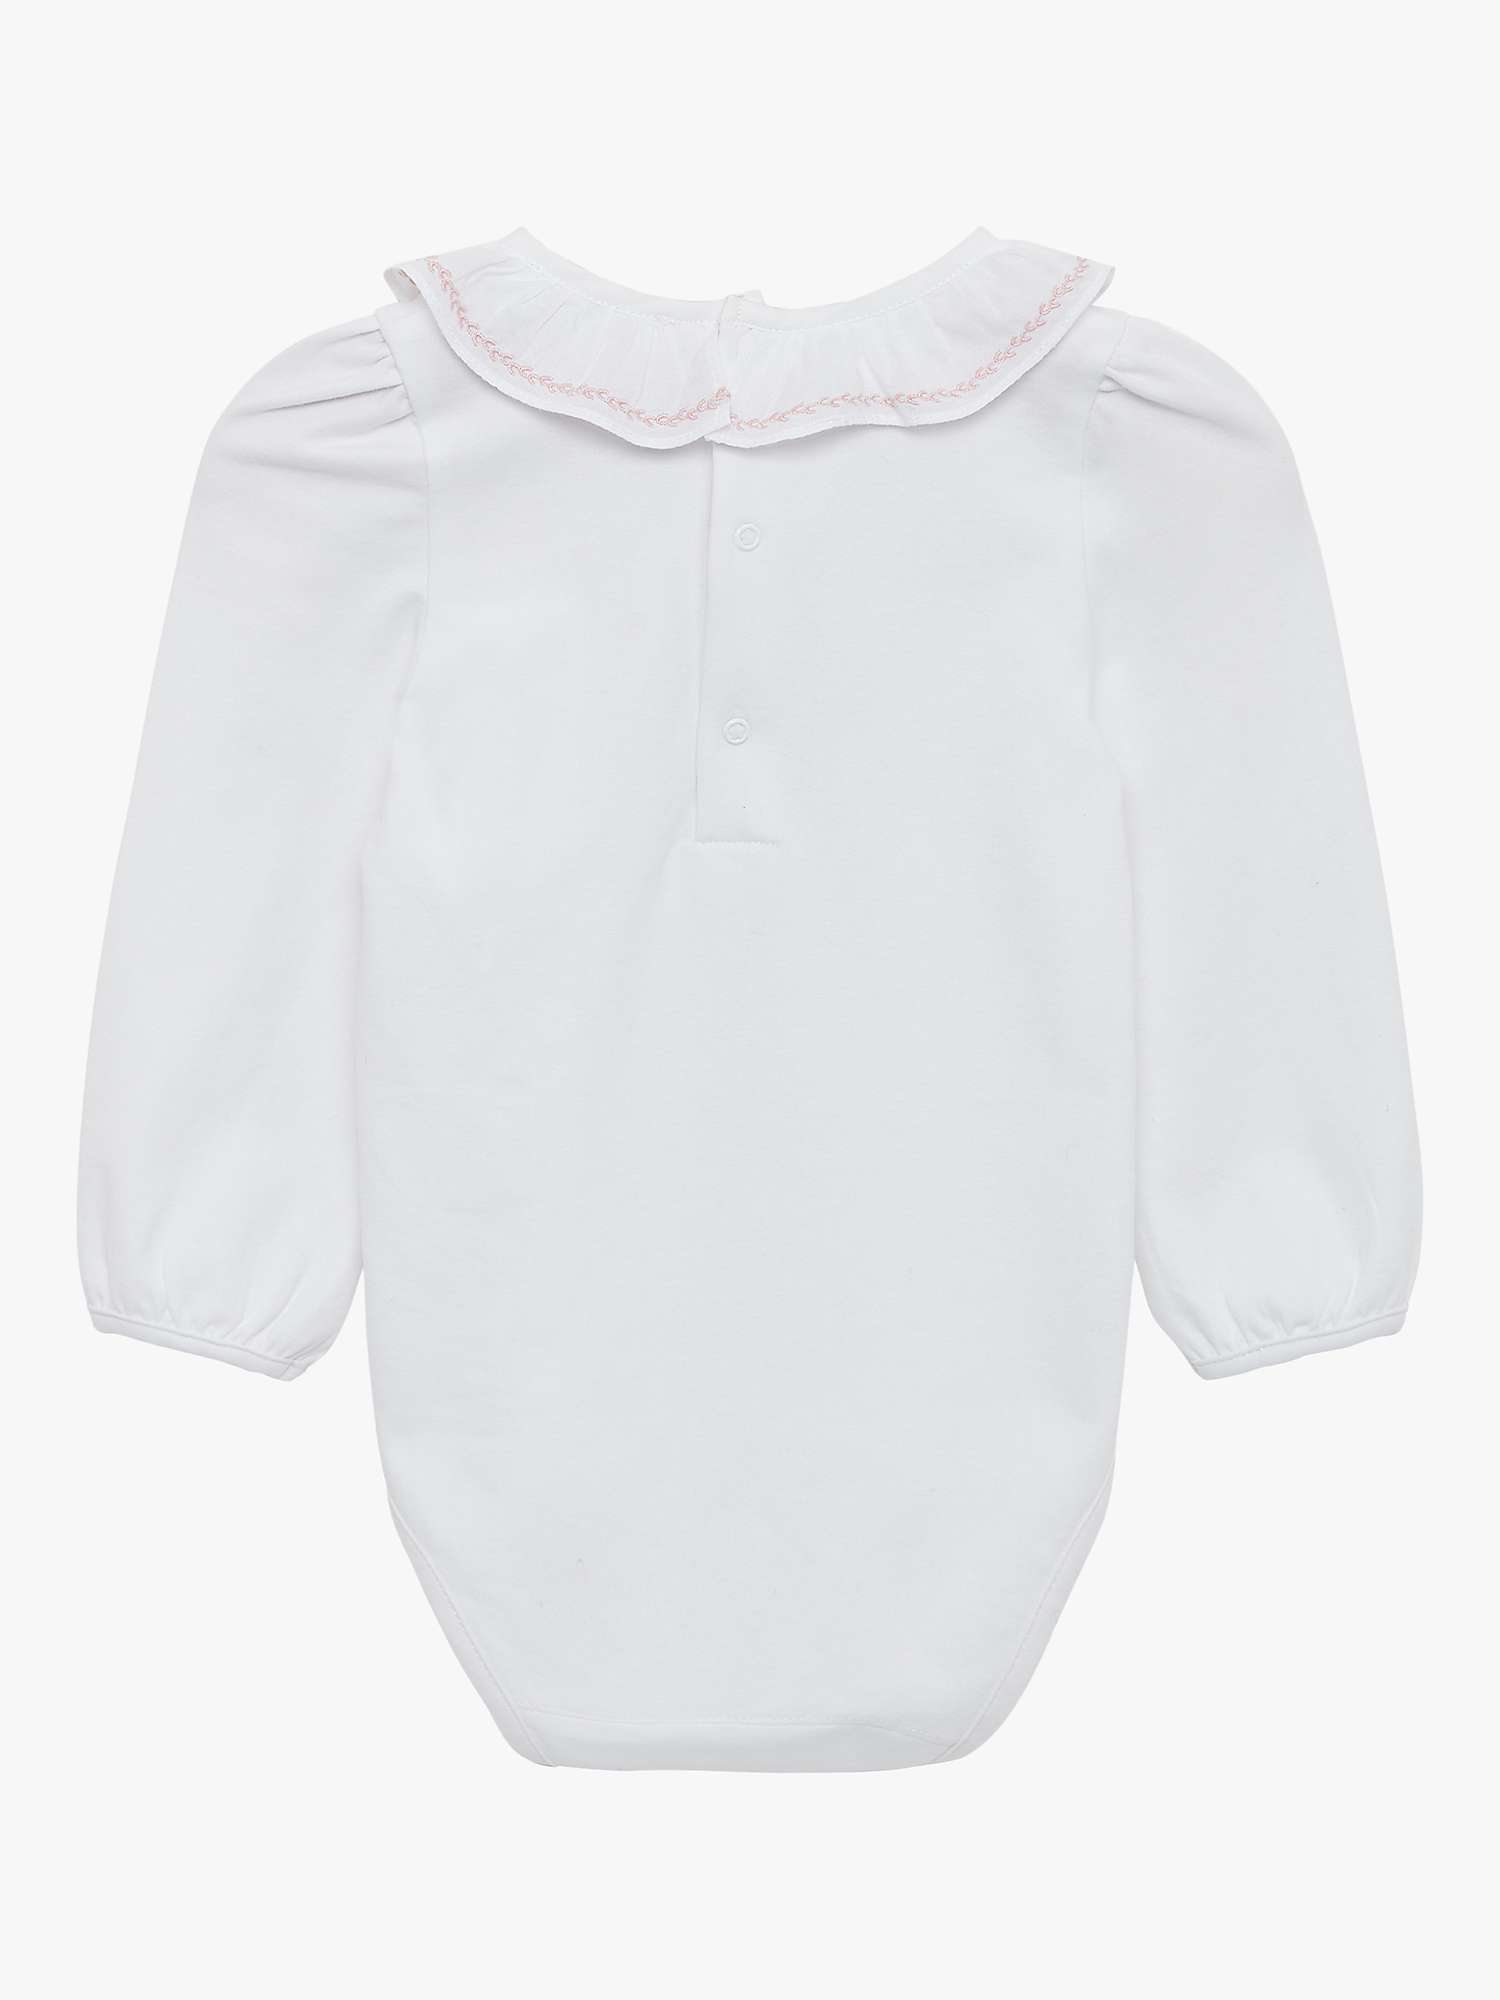 Buy Trotters Confiture Baby Lucy Willow Bodysuit, White Online at johnlewis.com